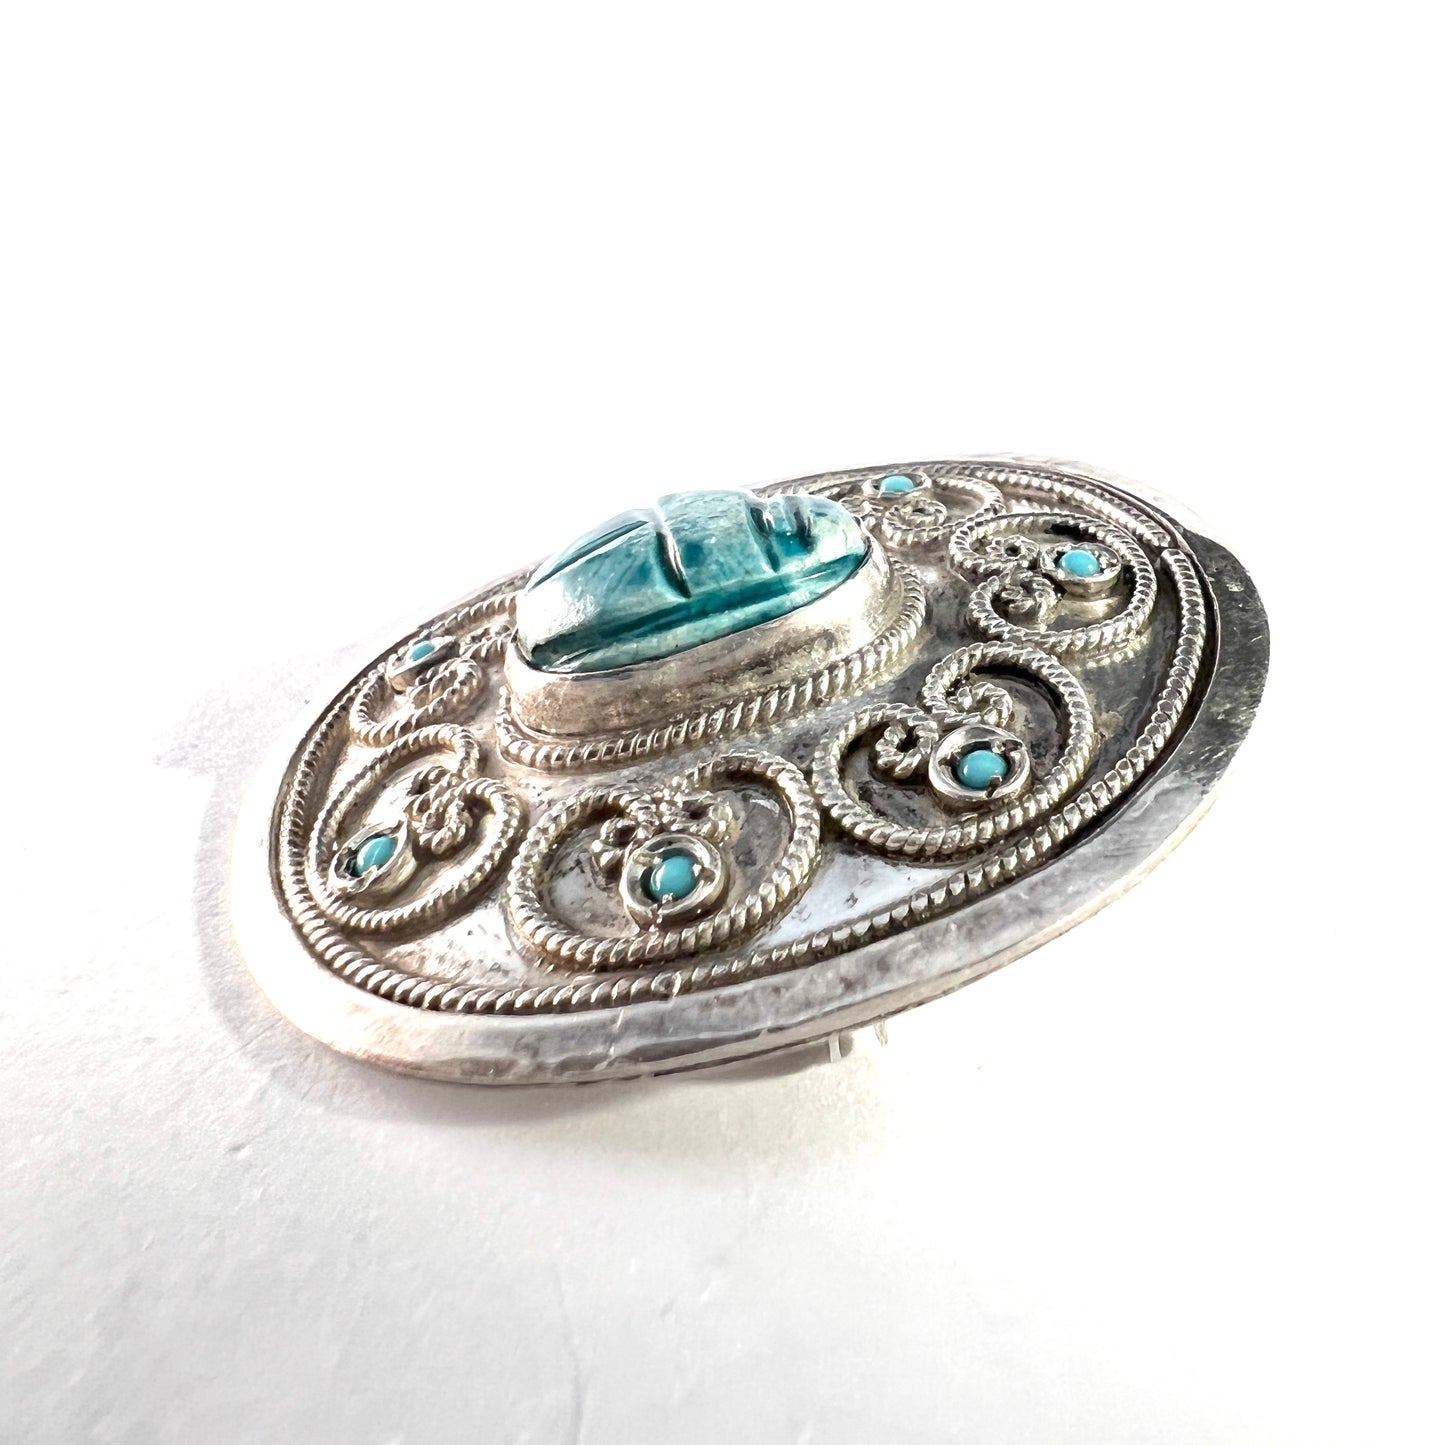 Egypt, Vintage 900 Silver Faience Scarab Turquoise Brooch Pendant.